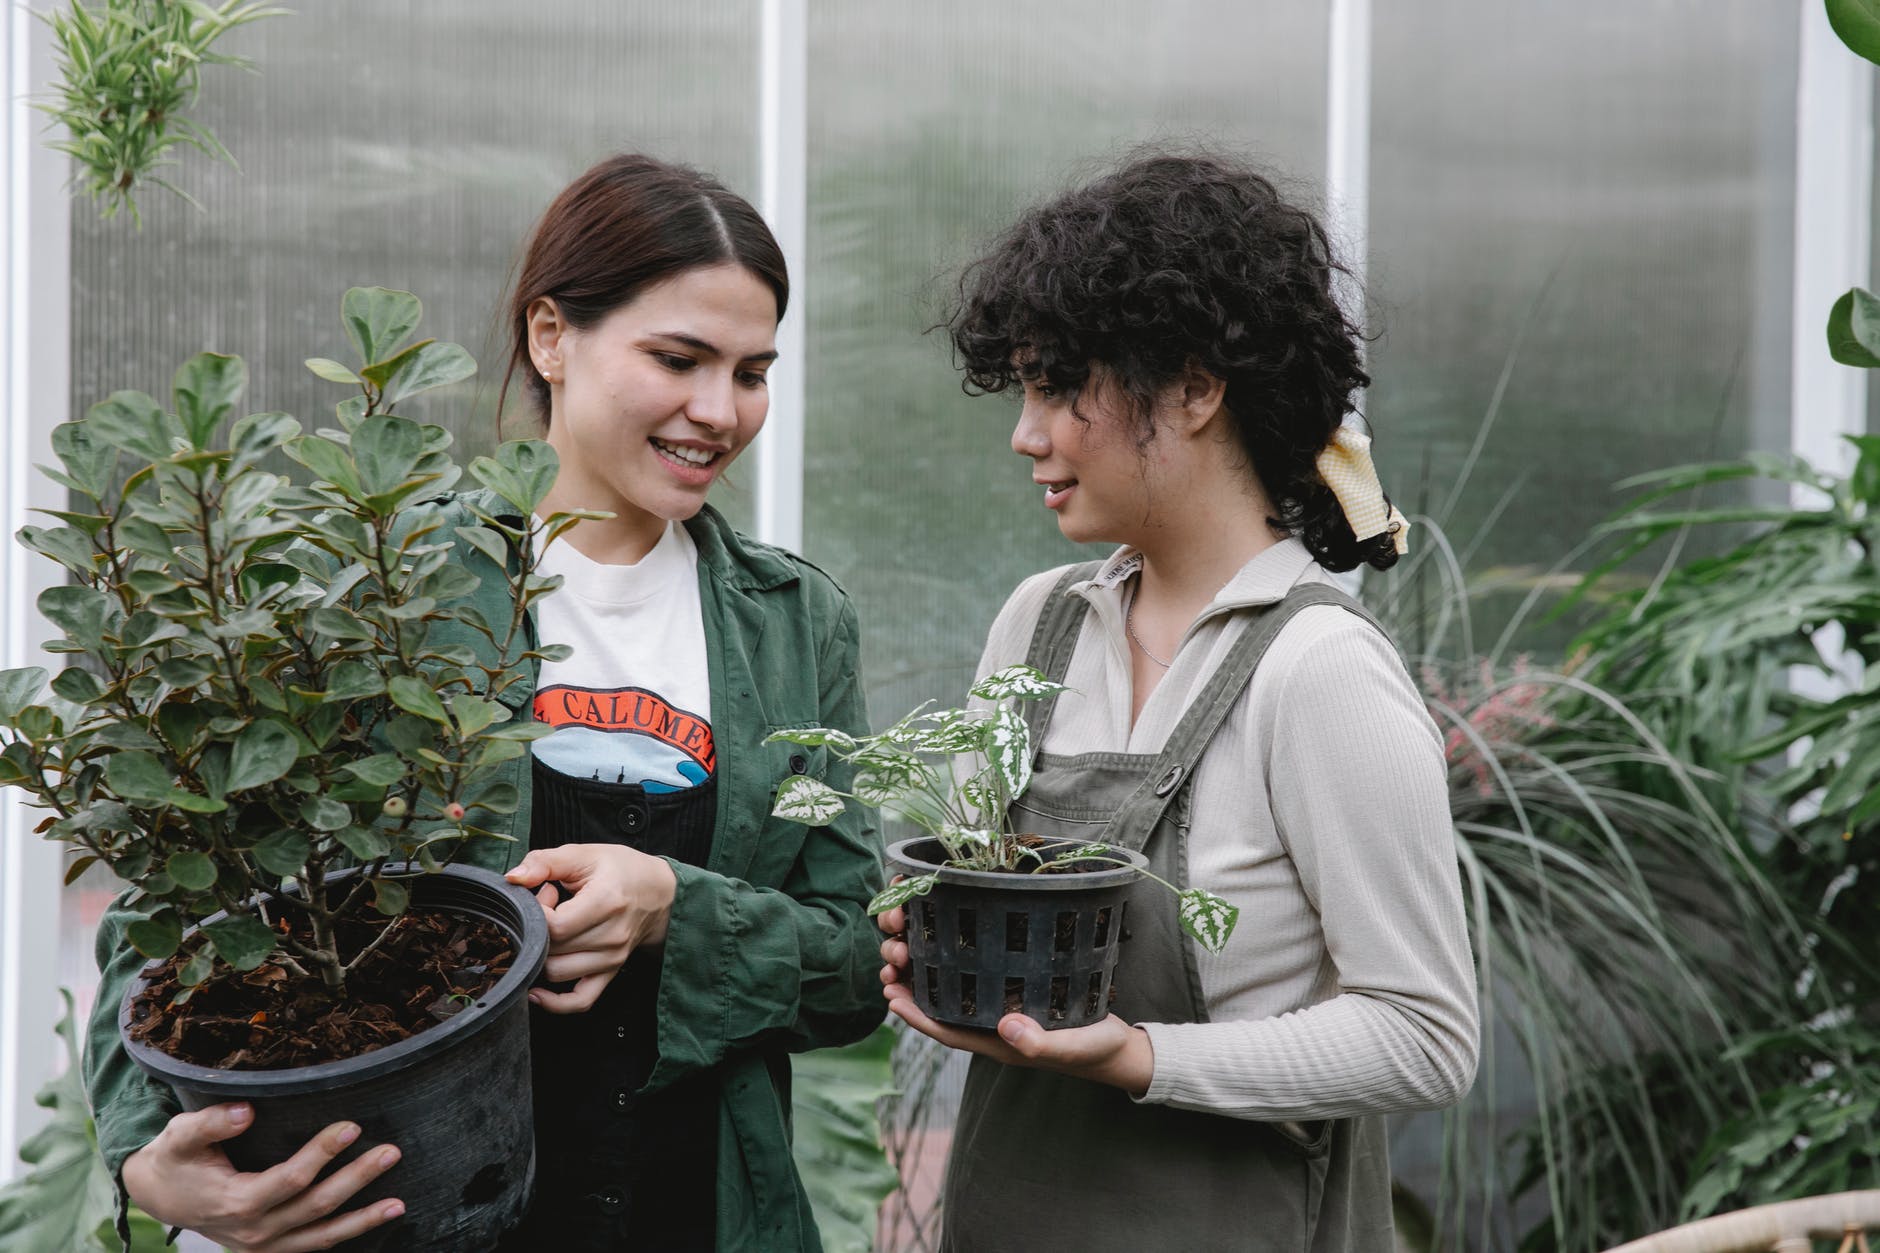 cheerful ethnic women with potted plants near greenhouse